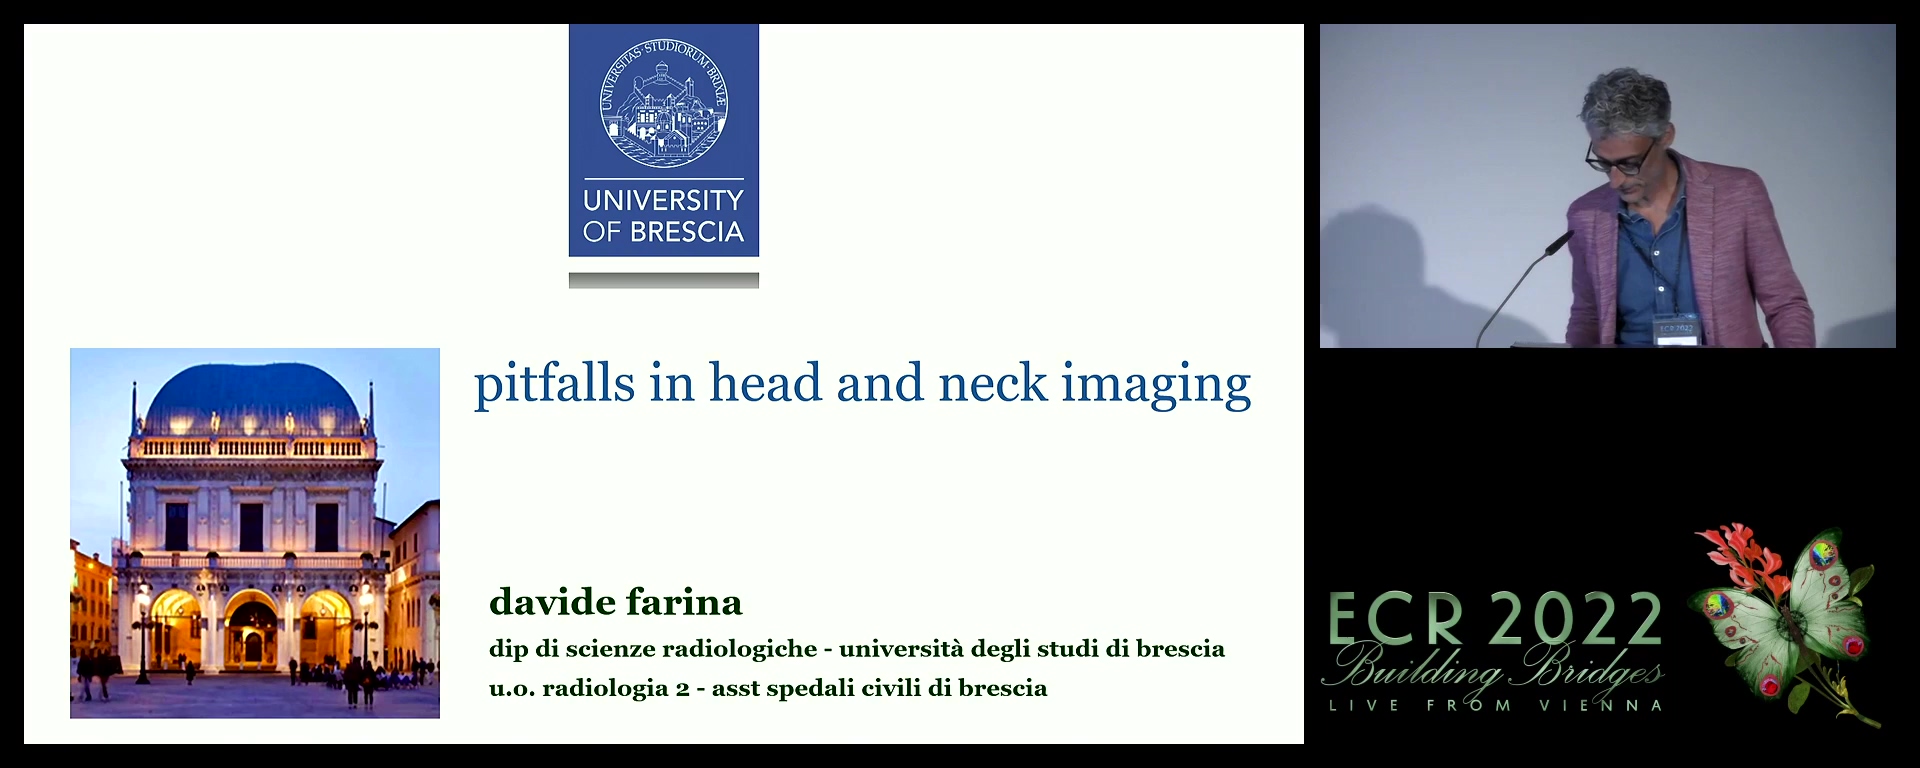 Pitfalls in head and neck imaging